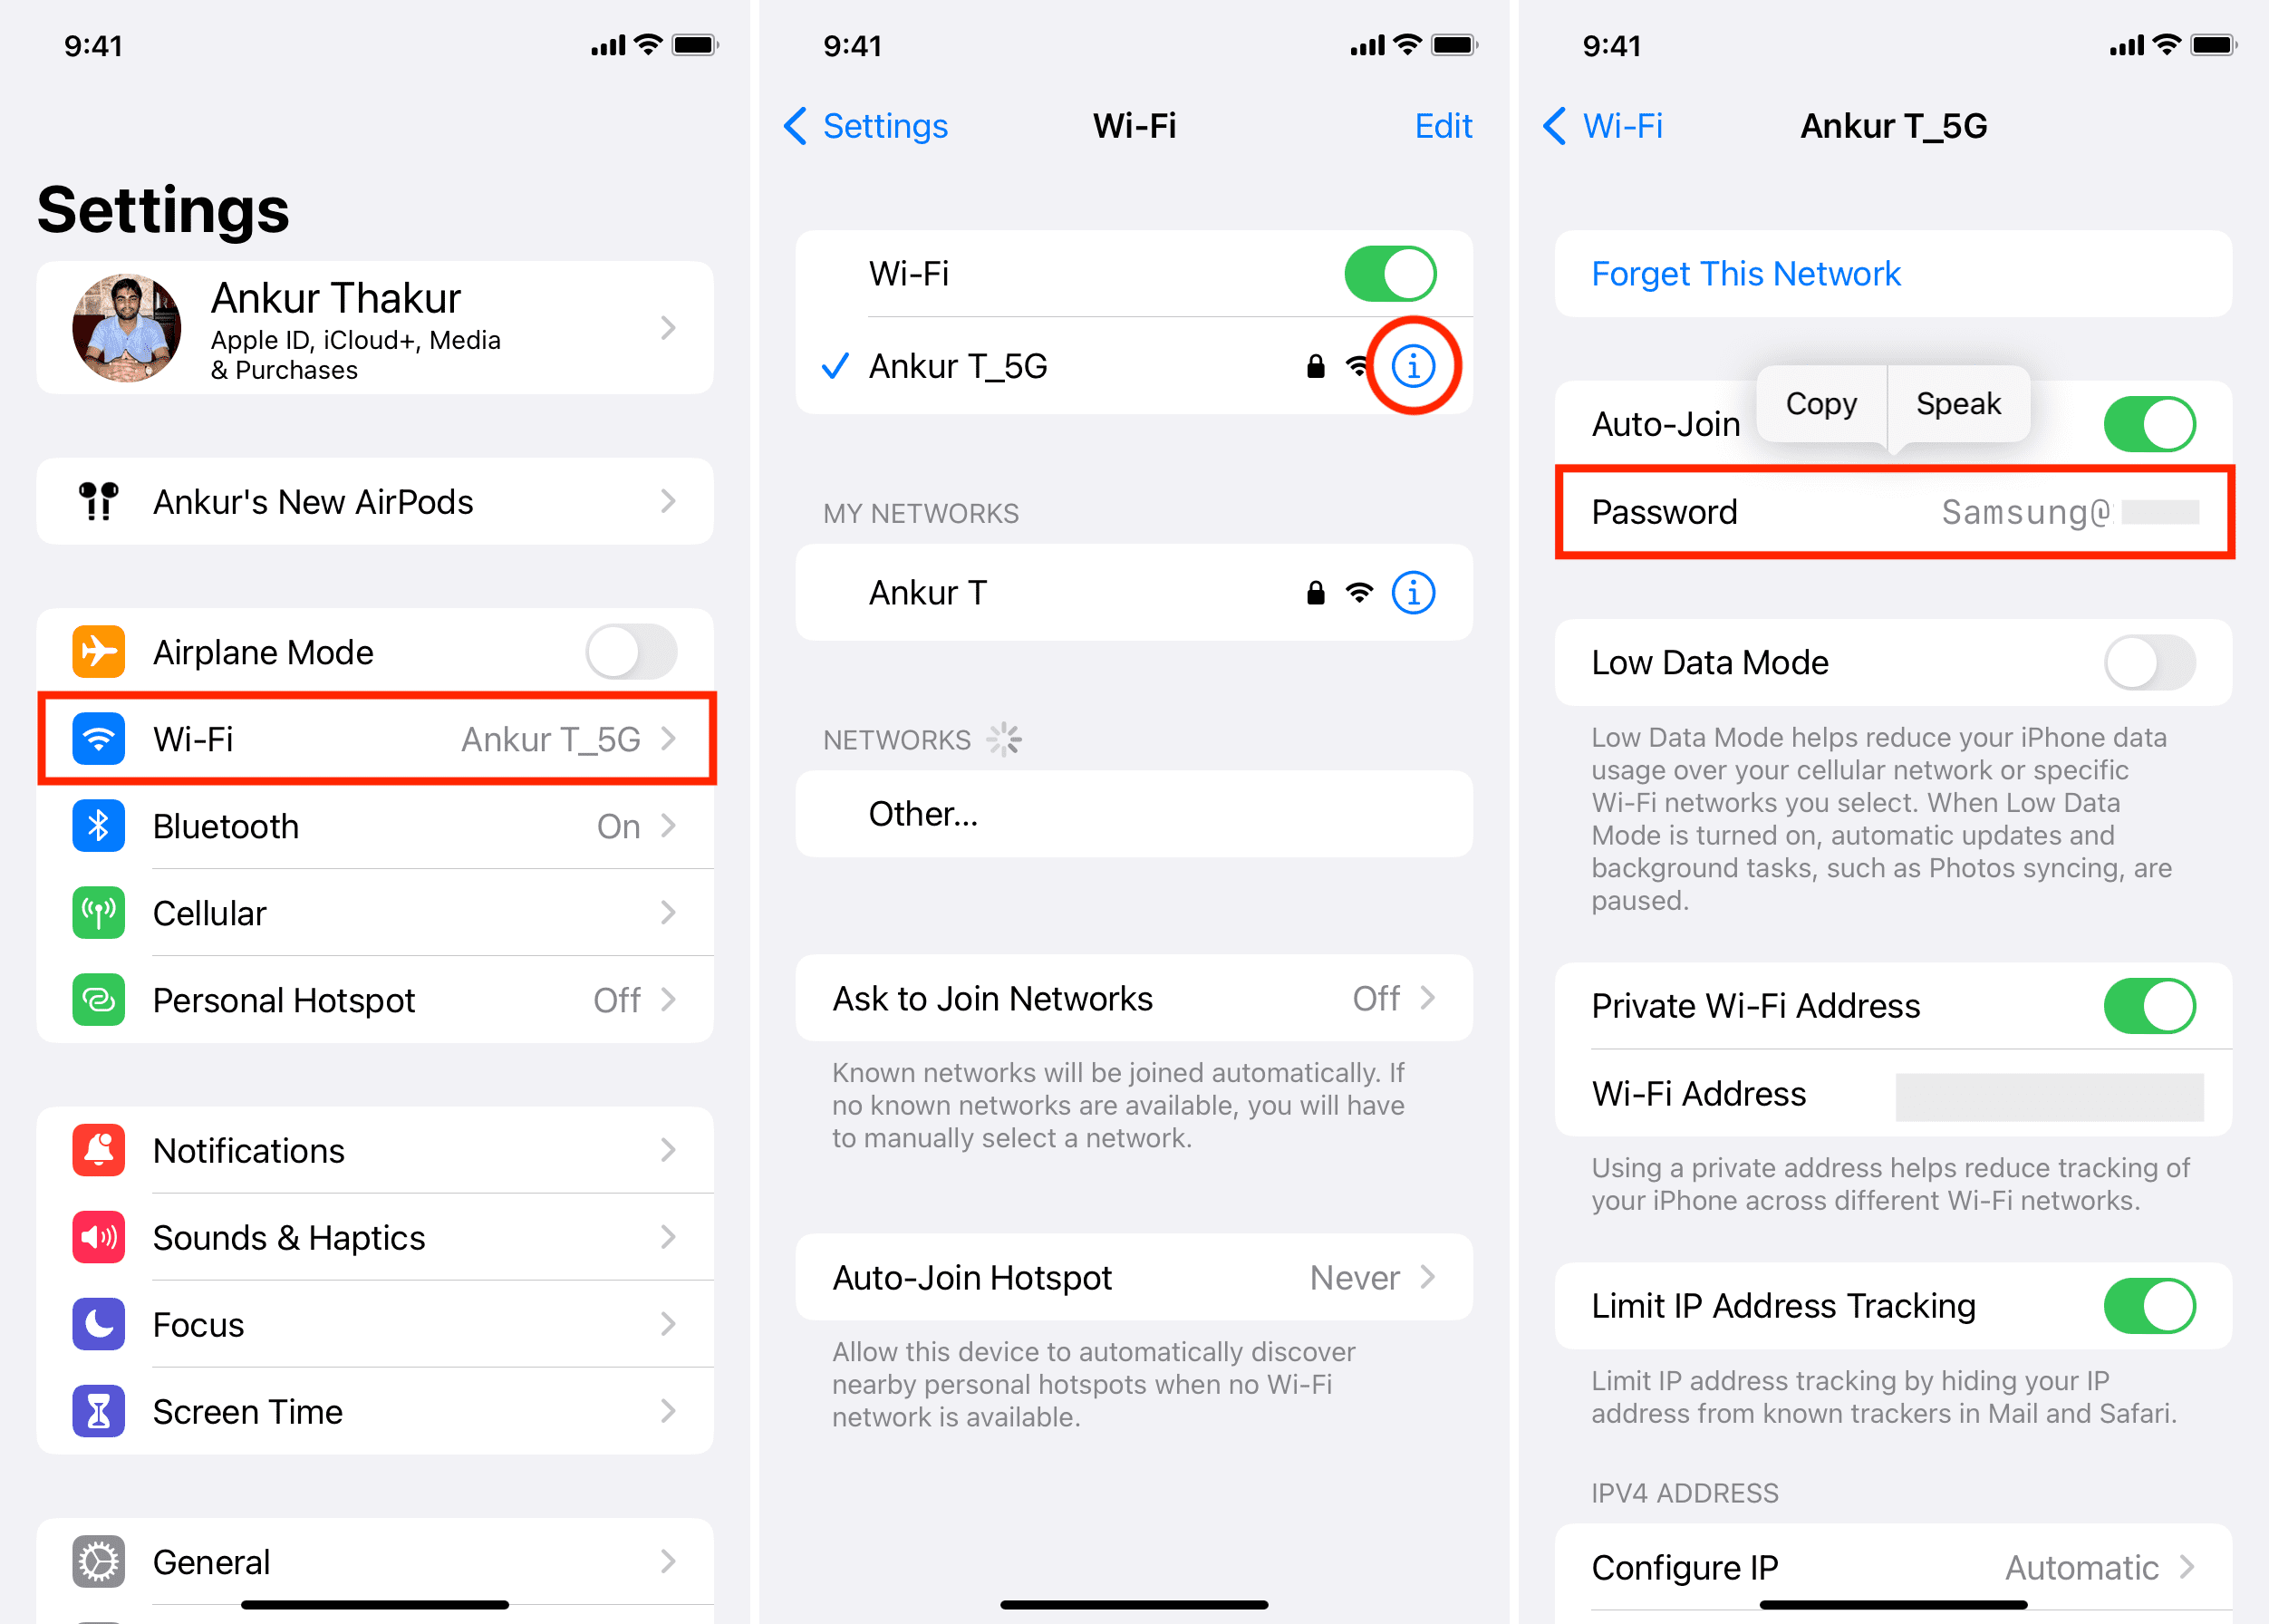 Three screenshots showing how to see the Wi-Fi password of a connected Wi-Fi network in iPhone Settings on iOS 16